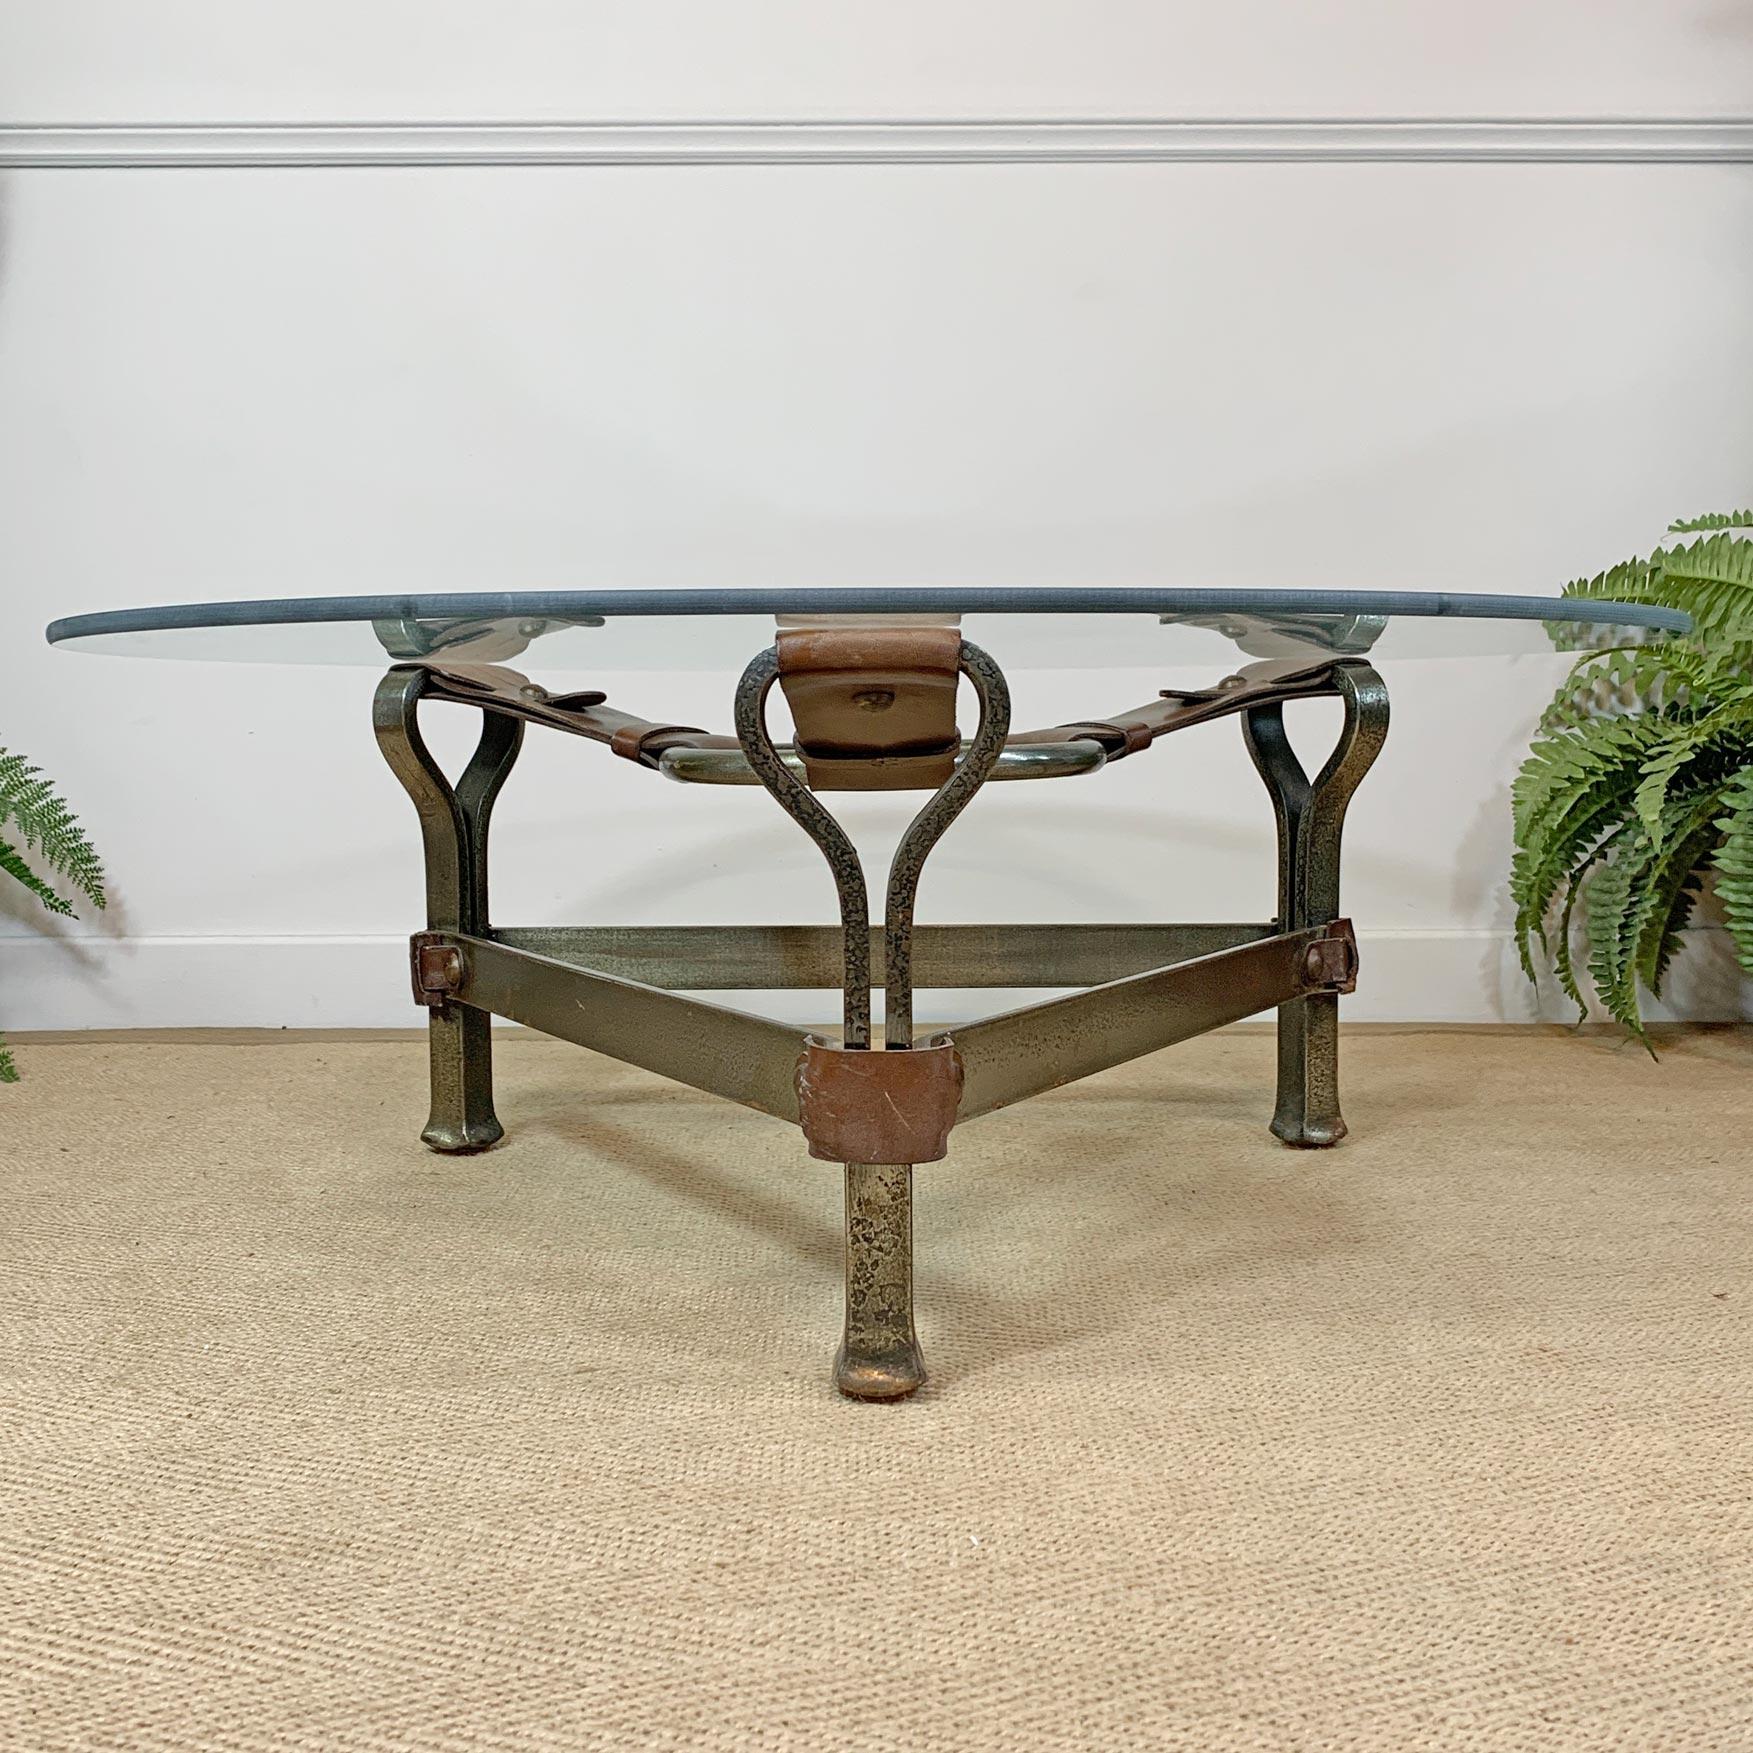 Jean-Pierre Ryckaert Tan Leather Strap and Steel Coffee Table For Sale 9